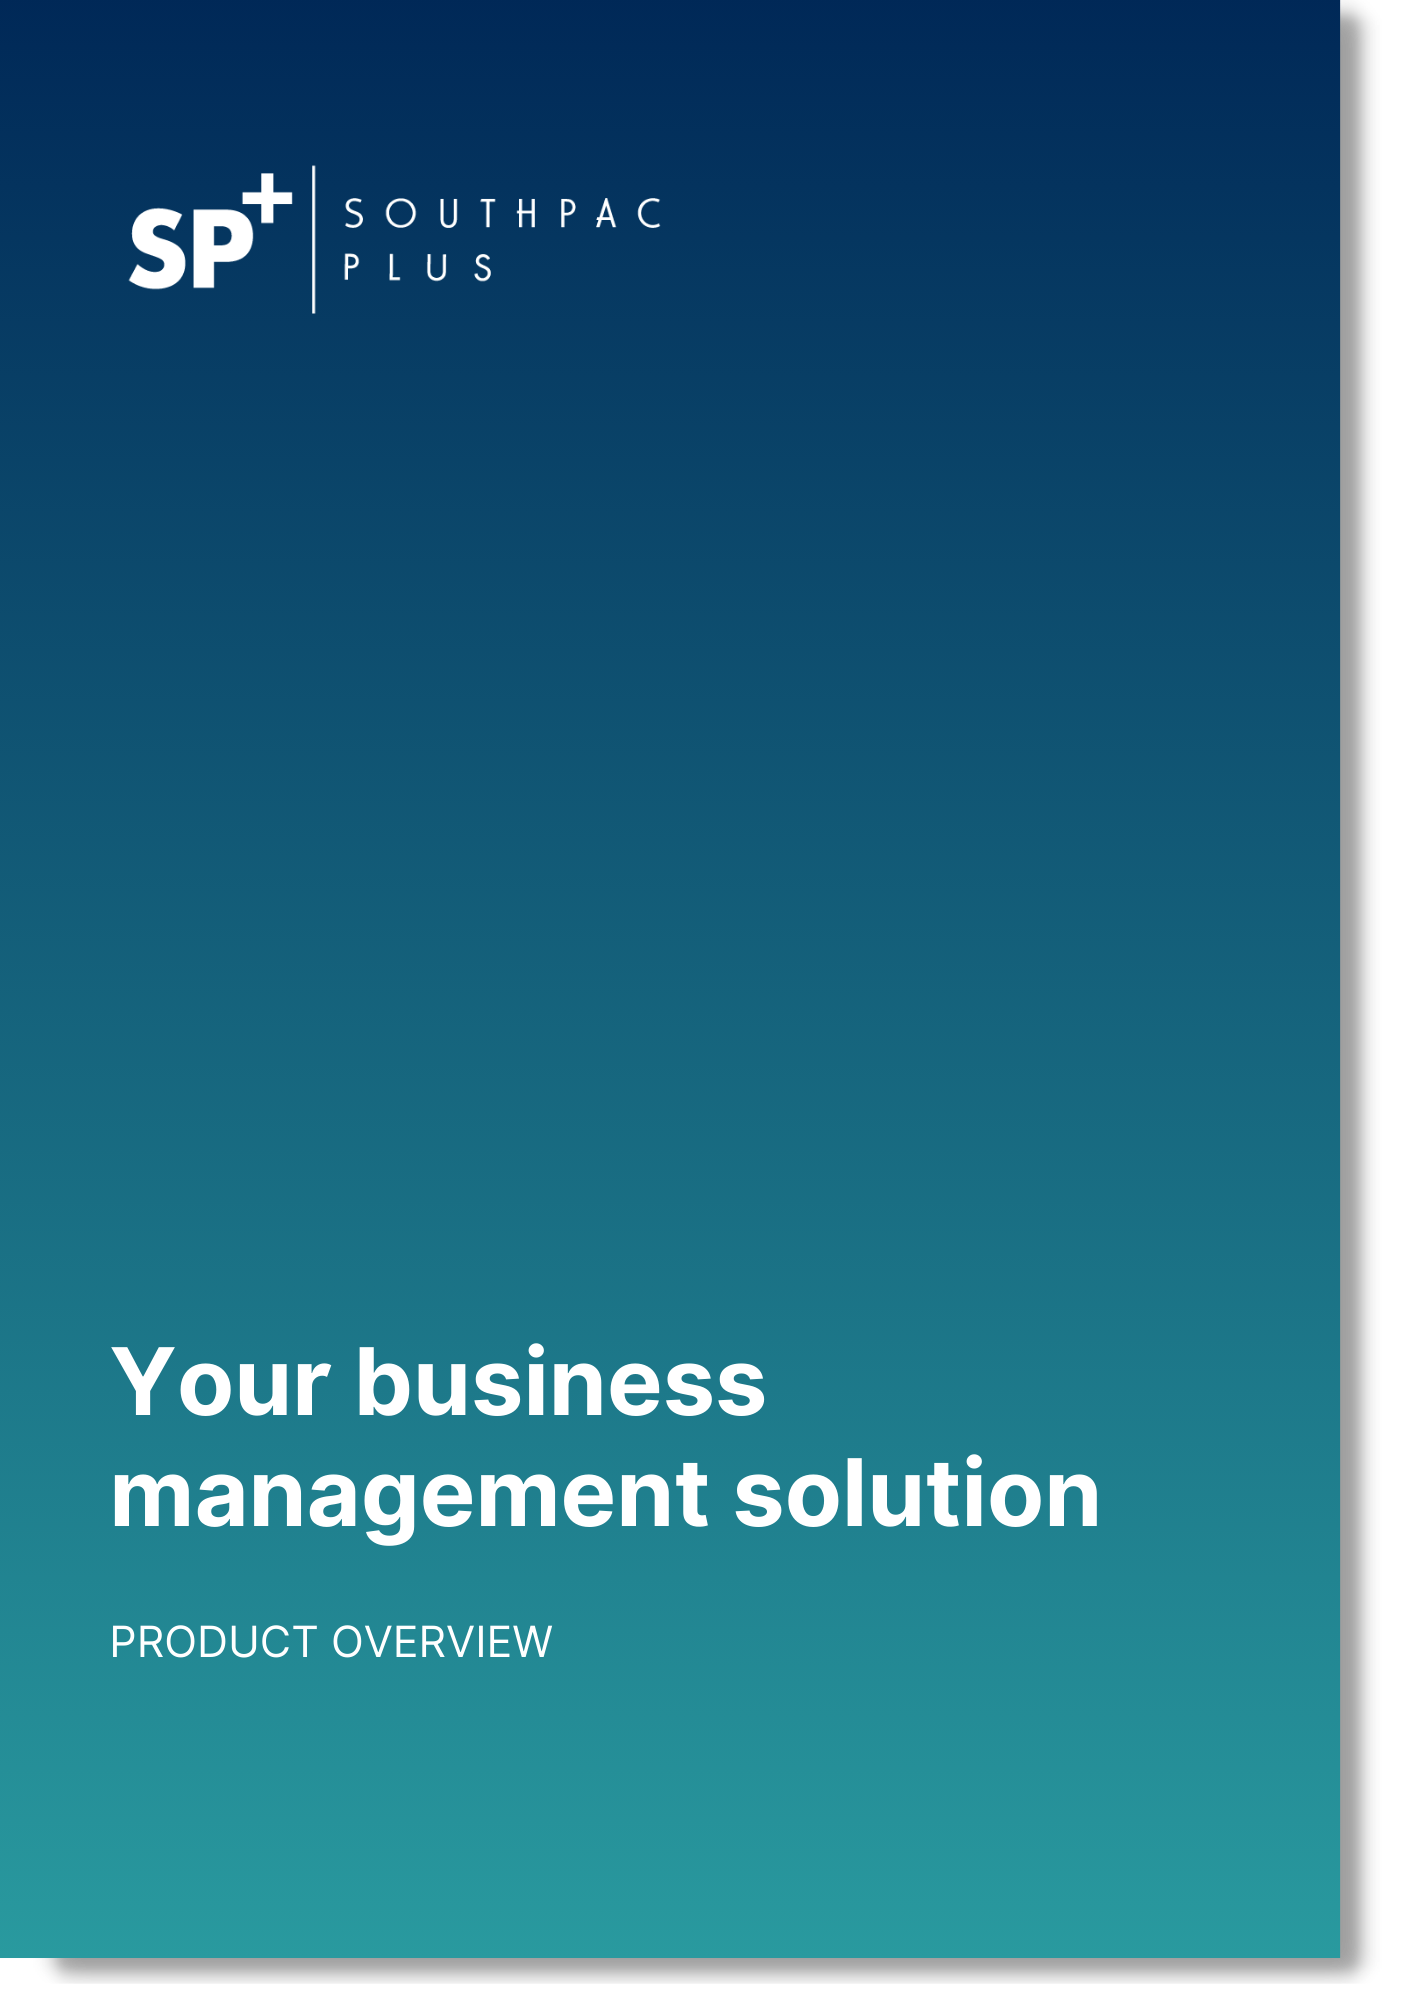 Southpac Plus downloadable Product Overview brochure entitled Your Business Management Solution.